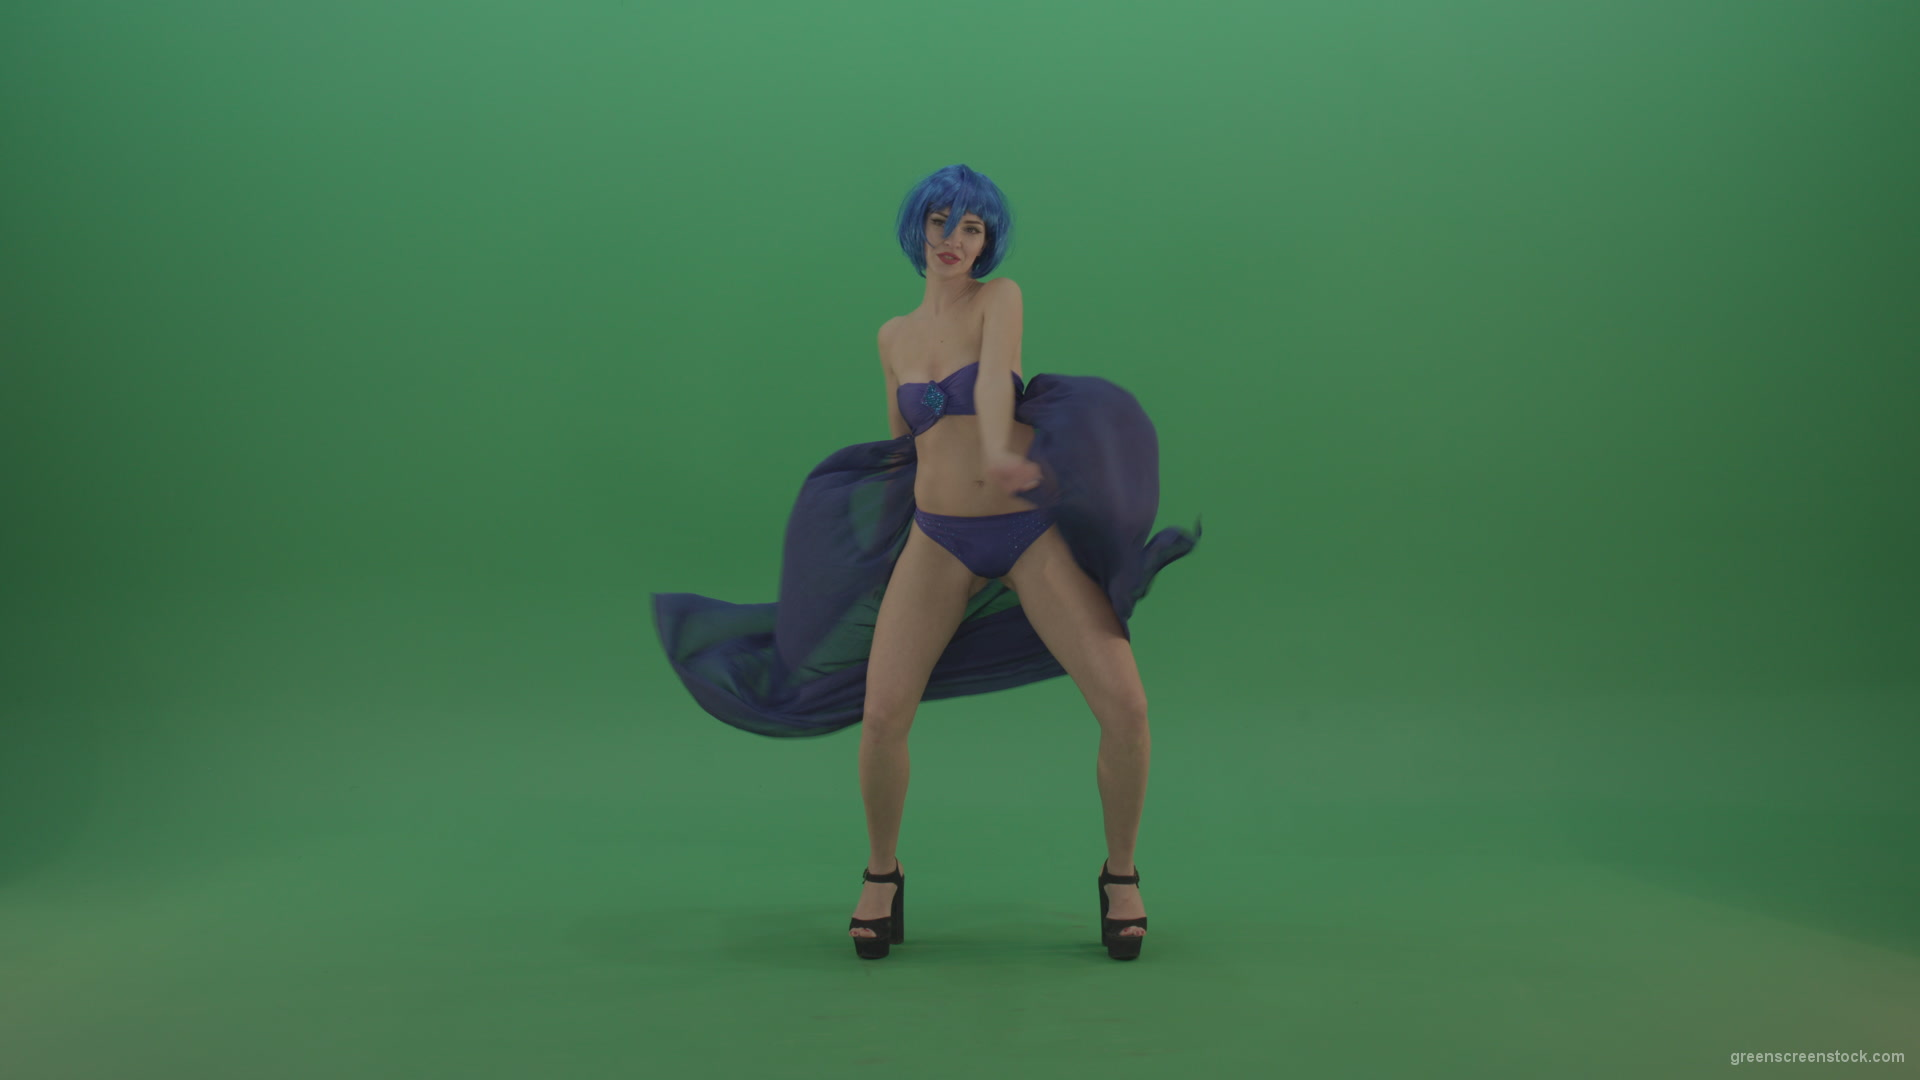 Full-size-erotic-young-girl-dancing-go-go-with-blue-dress-curtain-on-green-screen_006 Green Screen Stock